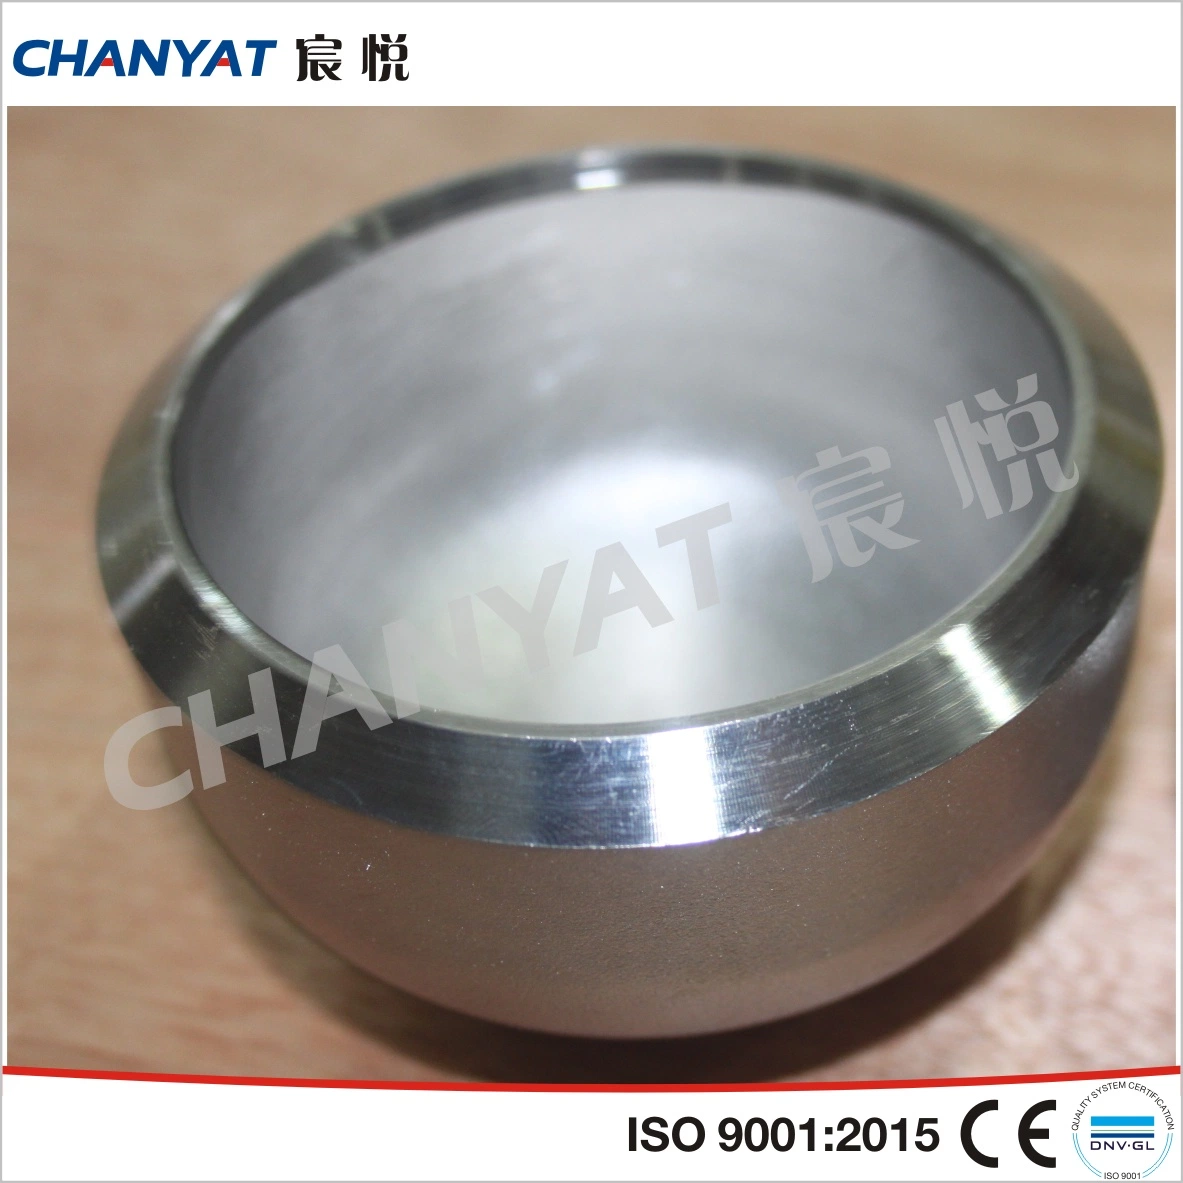 Stainless Steel Seamless Pipe Cap A403 (UNS S31803, UNS S32750)